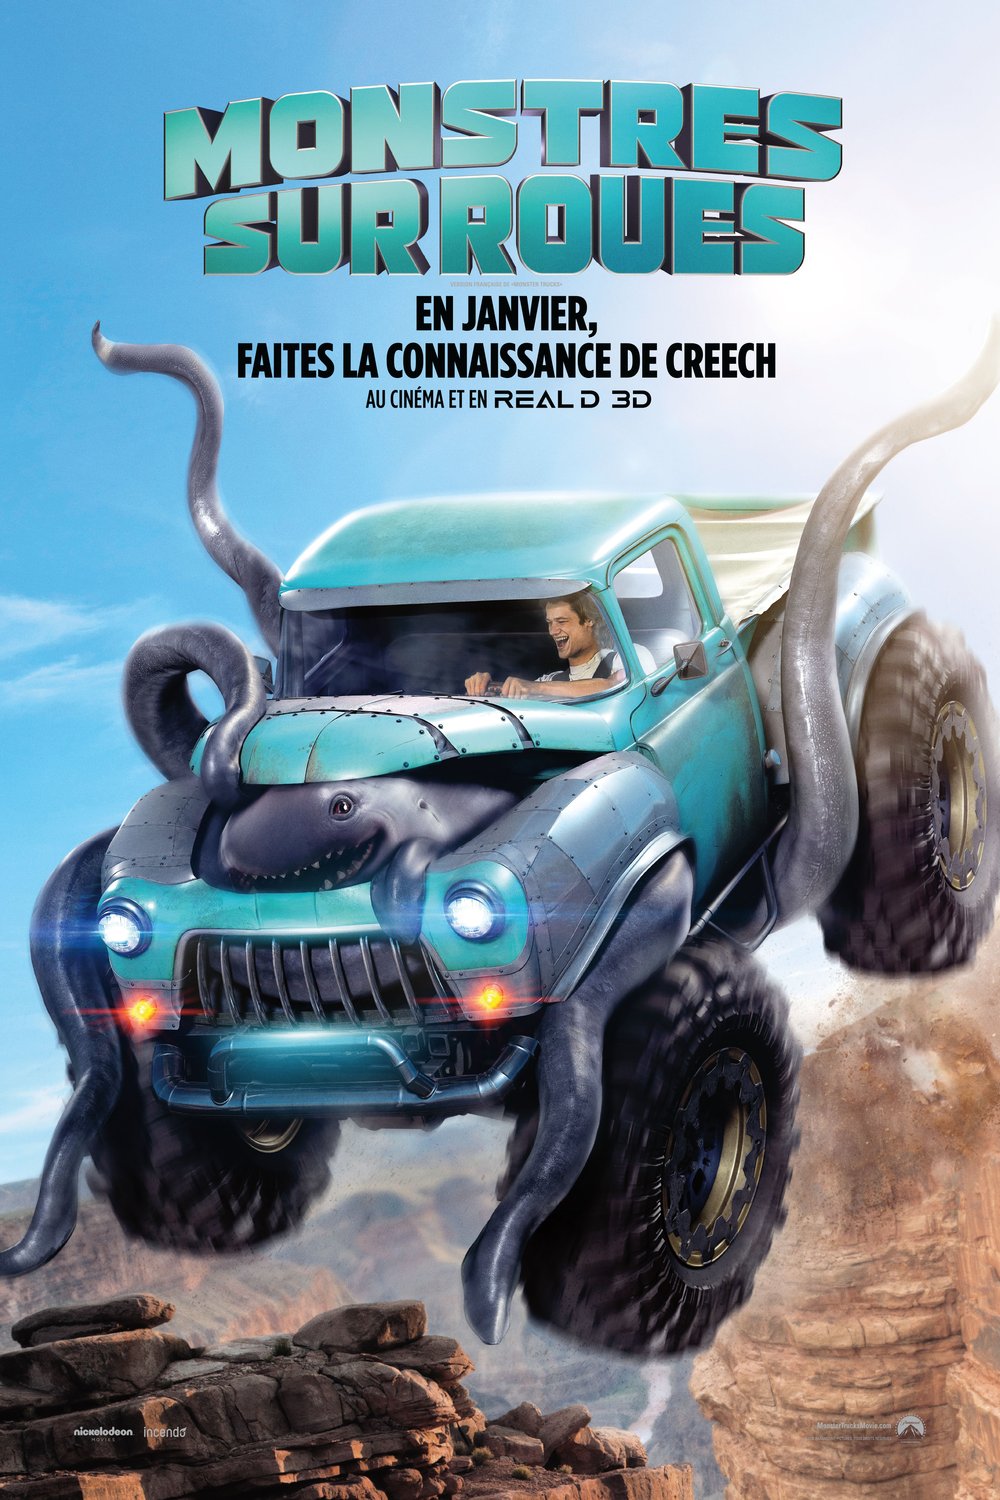 Poster of the movie Monstres sur roues